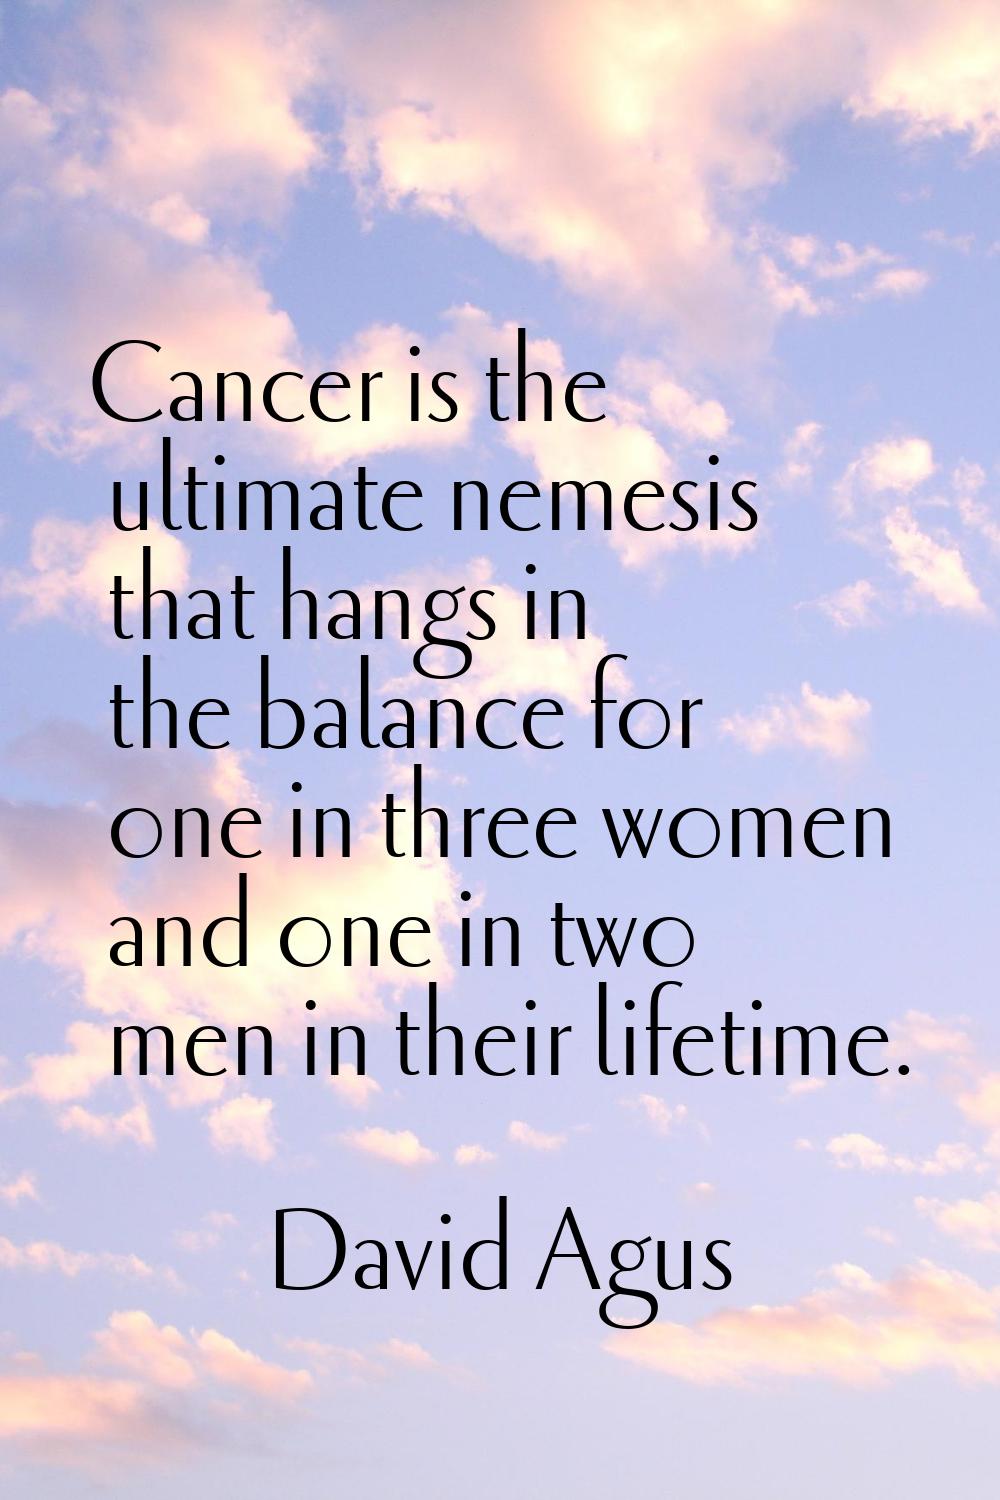 Cancer is the ultimate nemesis that hangs in the balance for one in three women and one in two men 